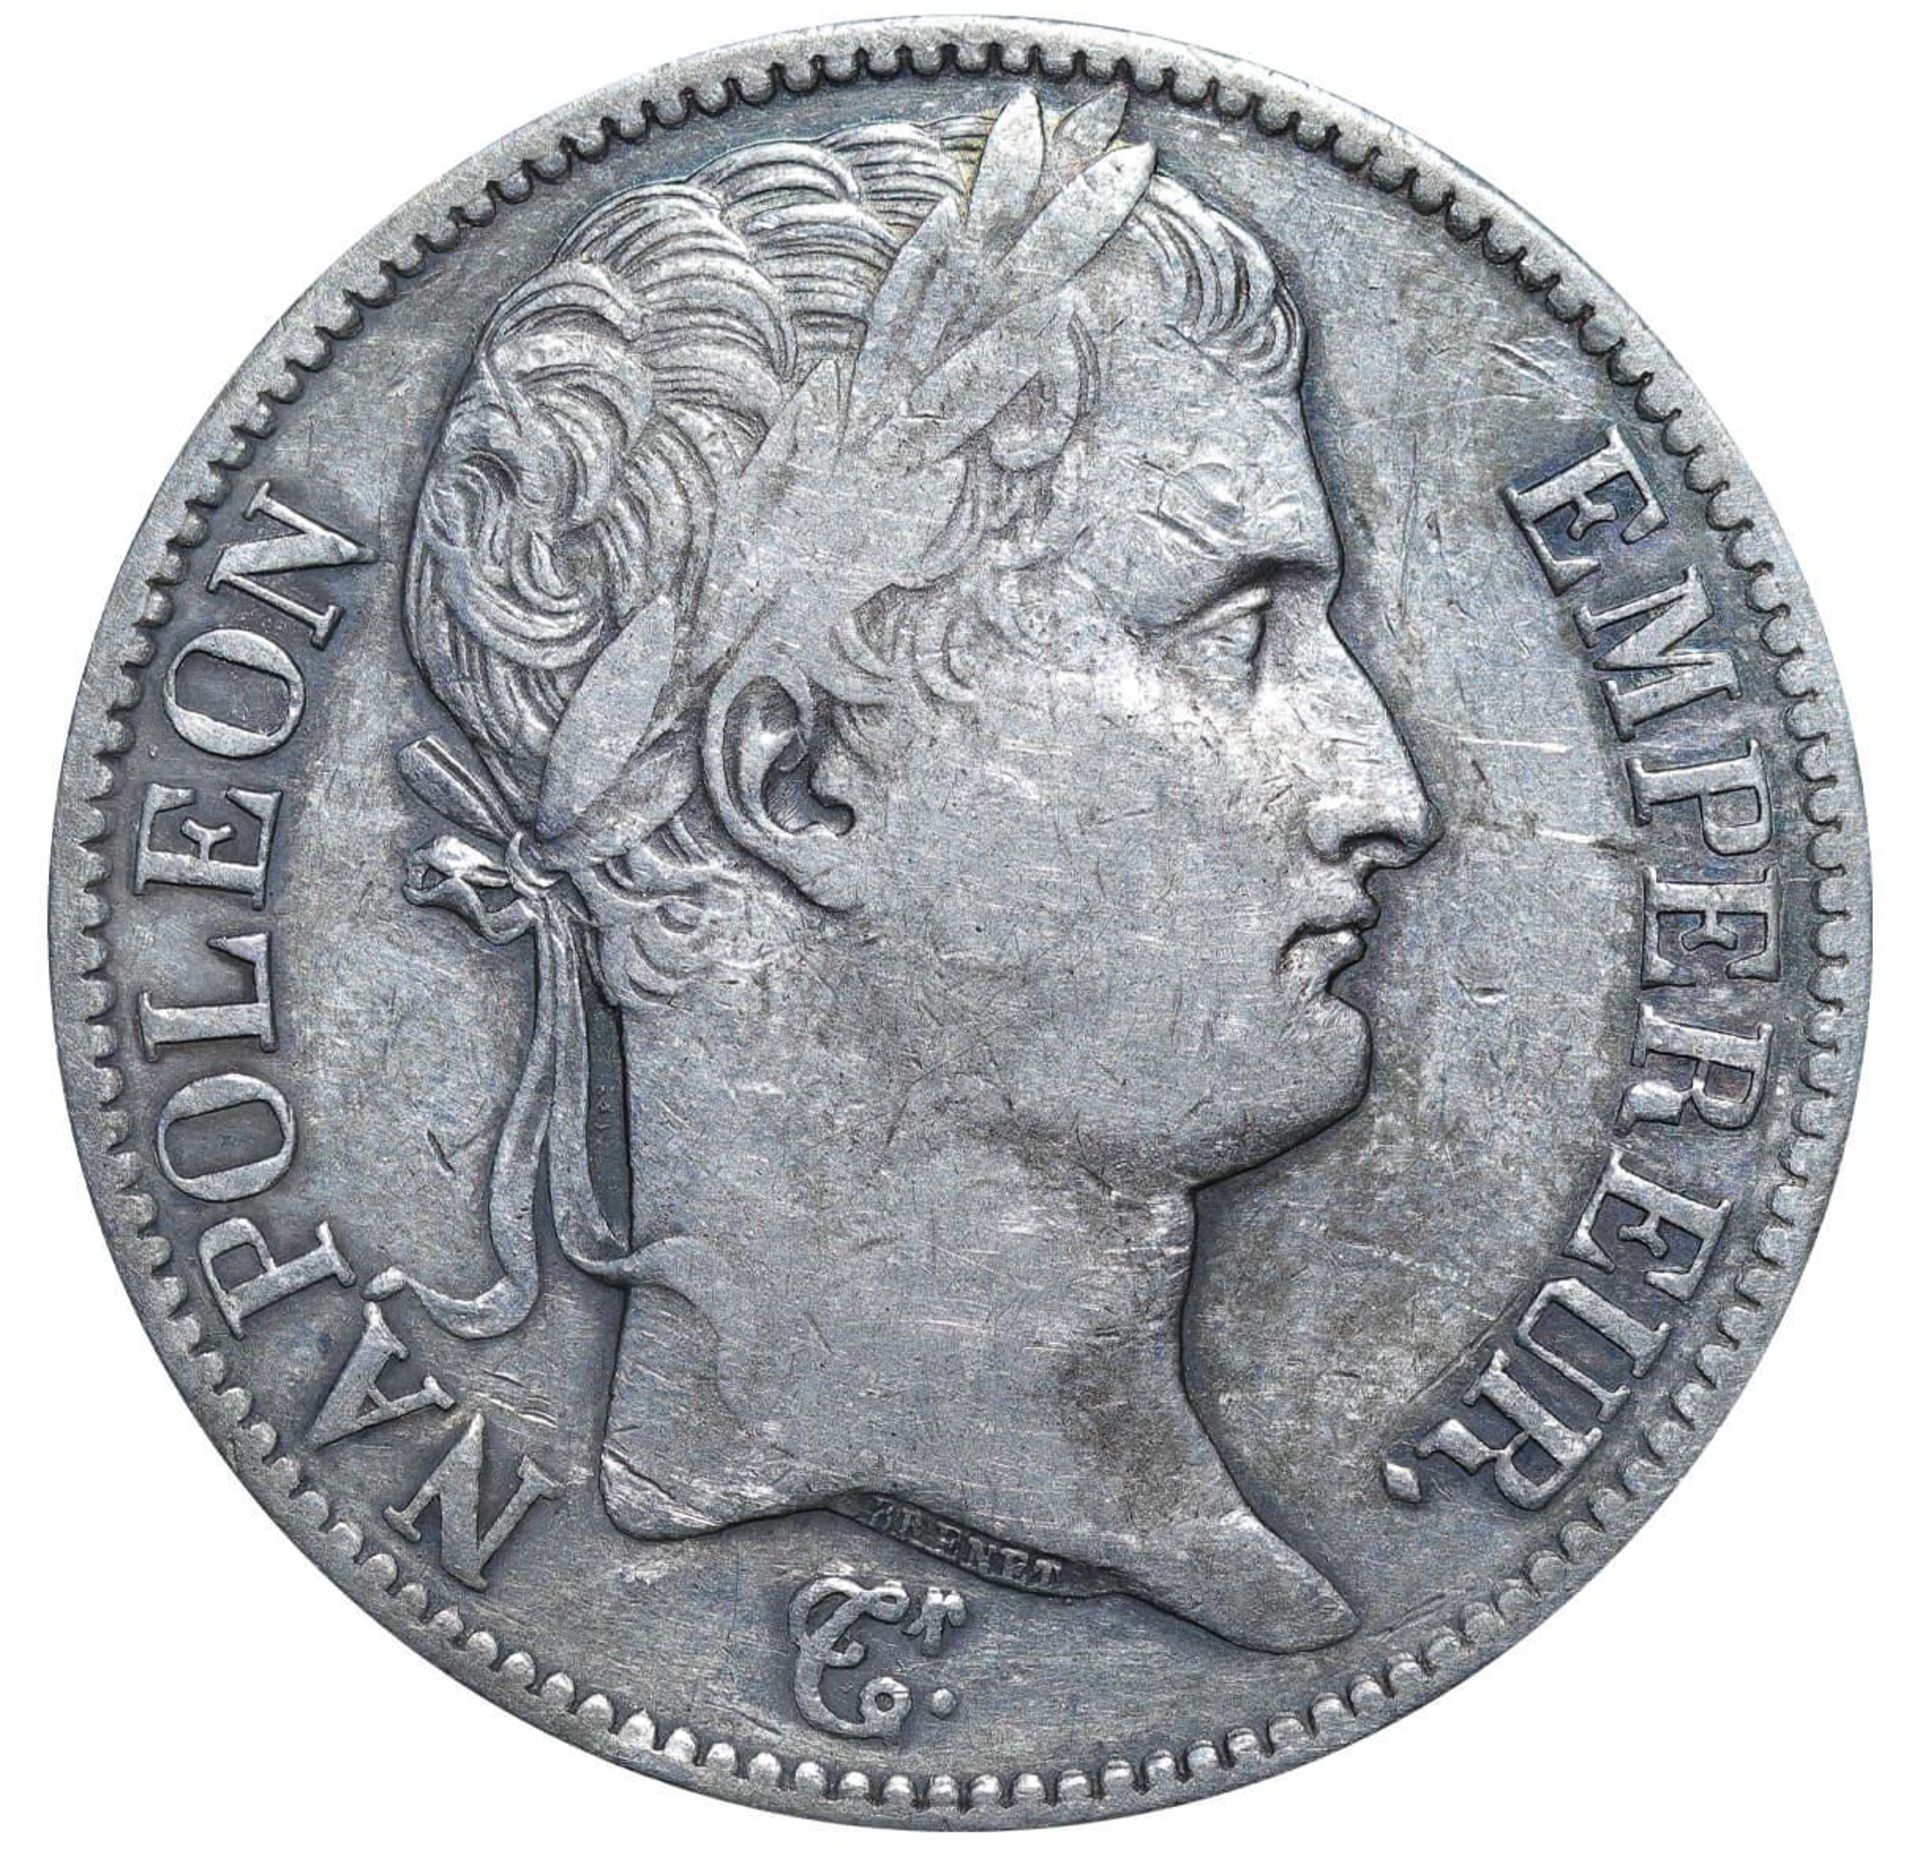 France, 5 Francs, 1811 year, A - Image 2 of 3